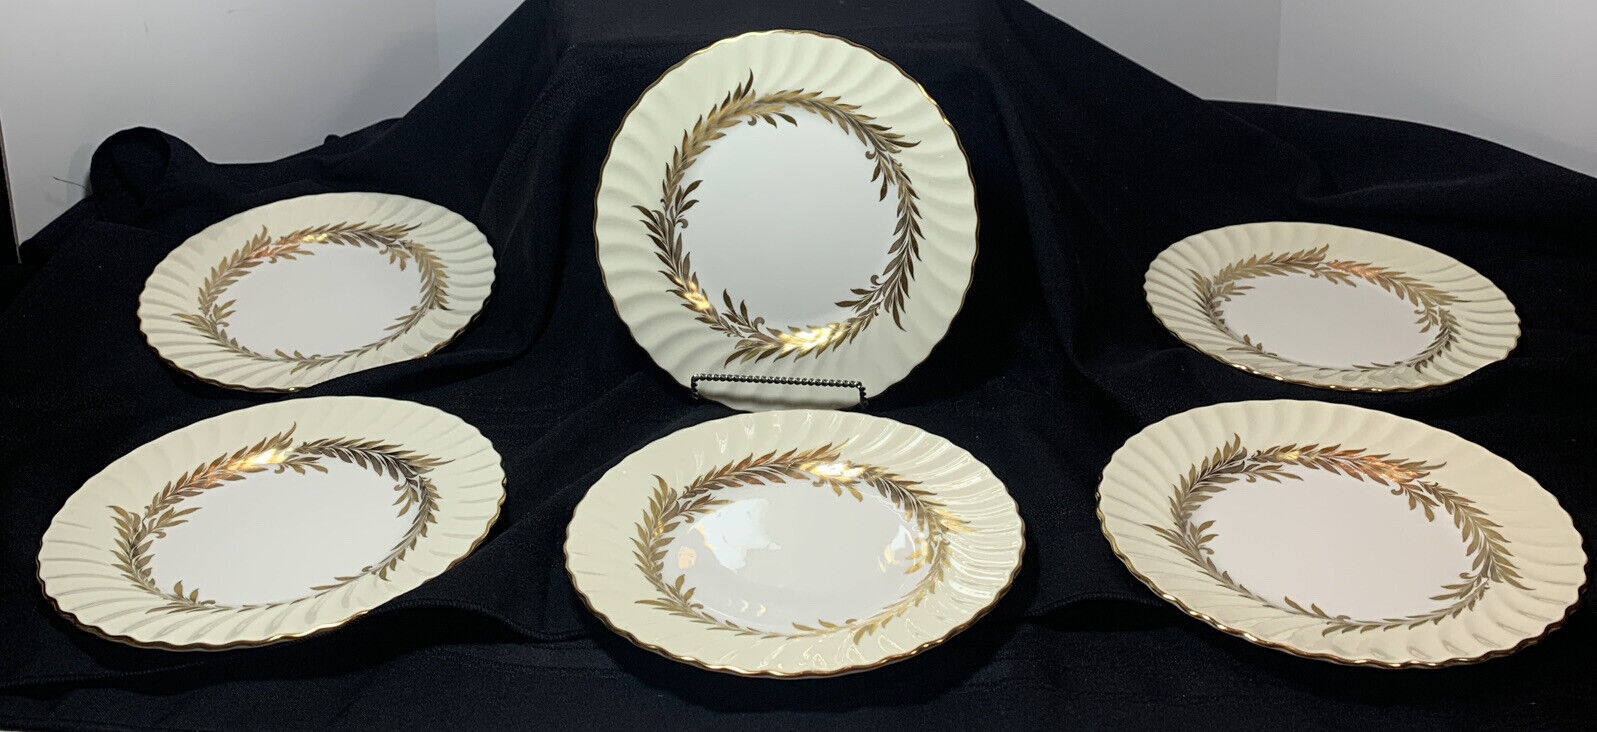 6 Minton Golden Symphony Salad Plates White with Gold Rim & Leaves 8”